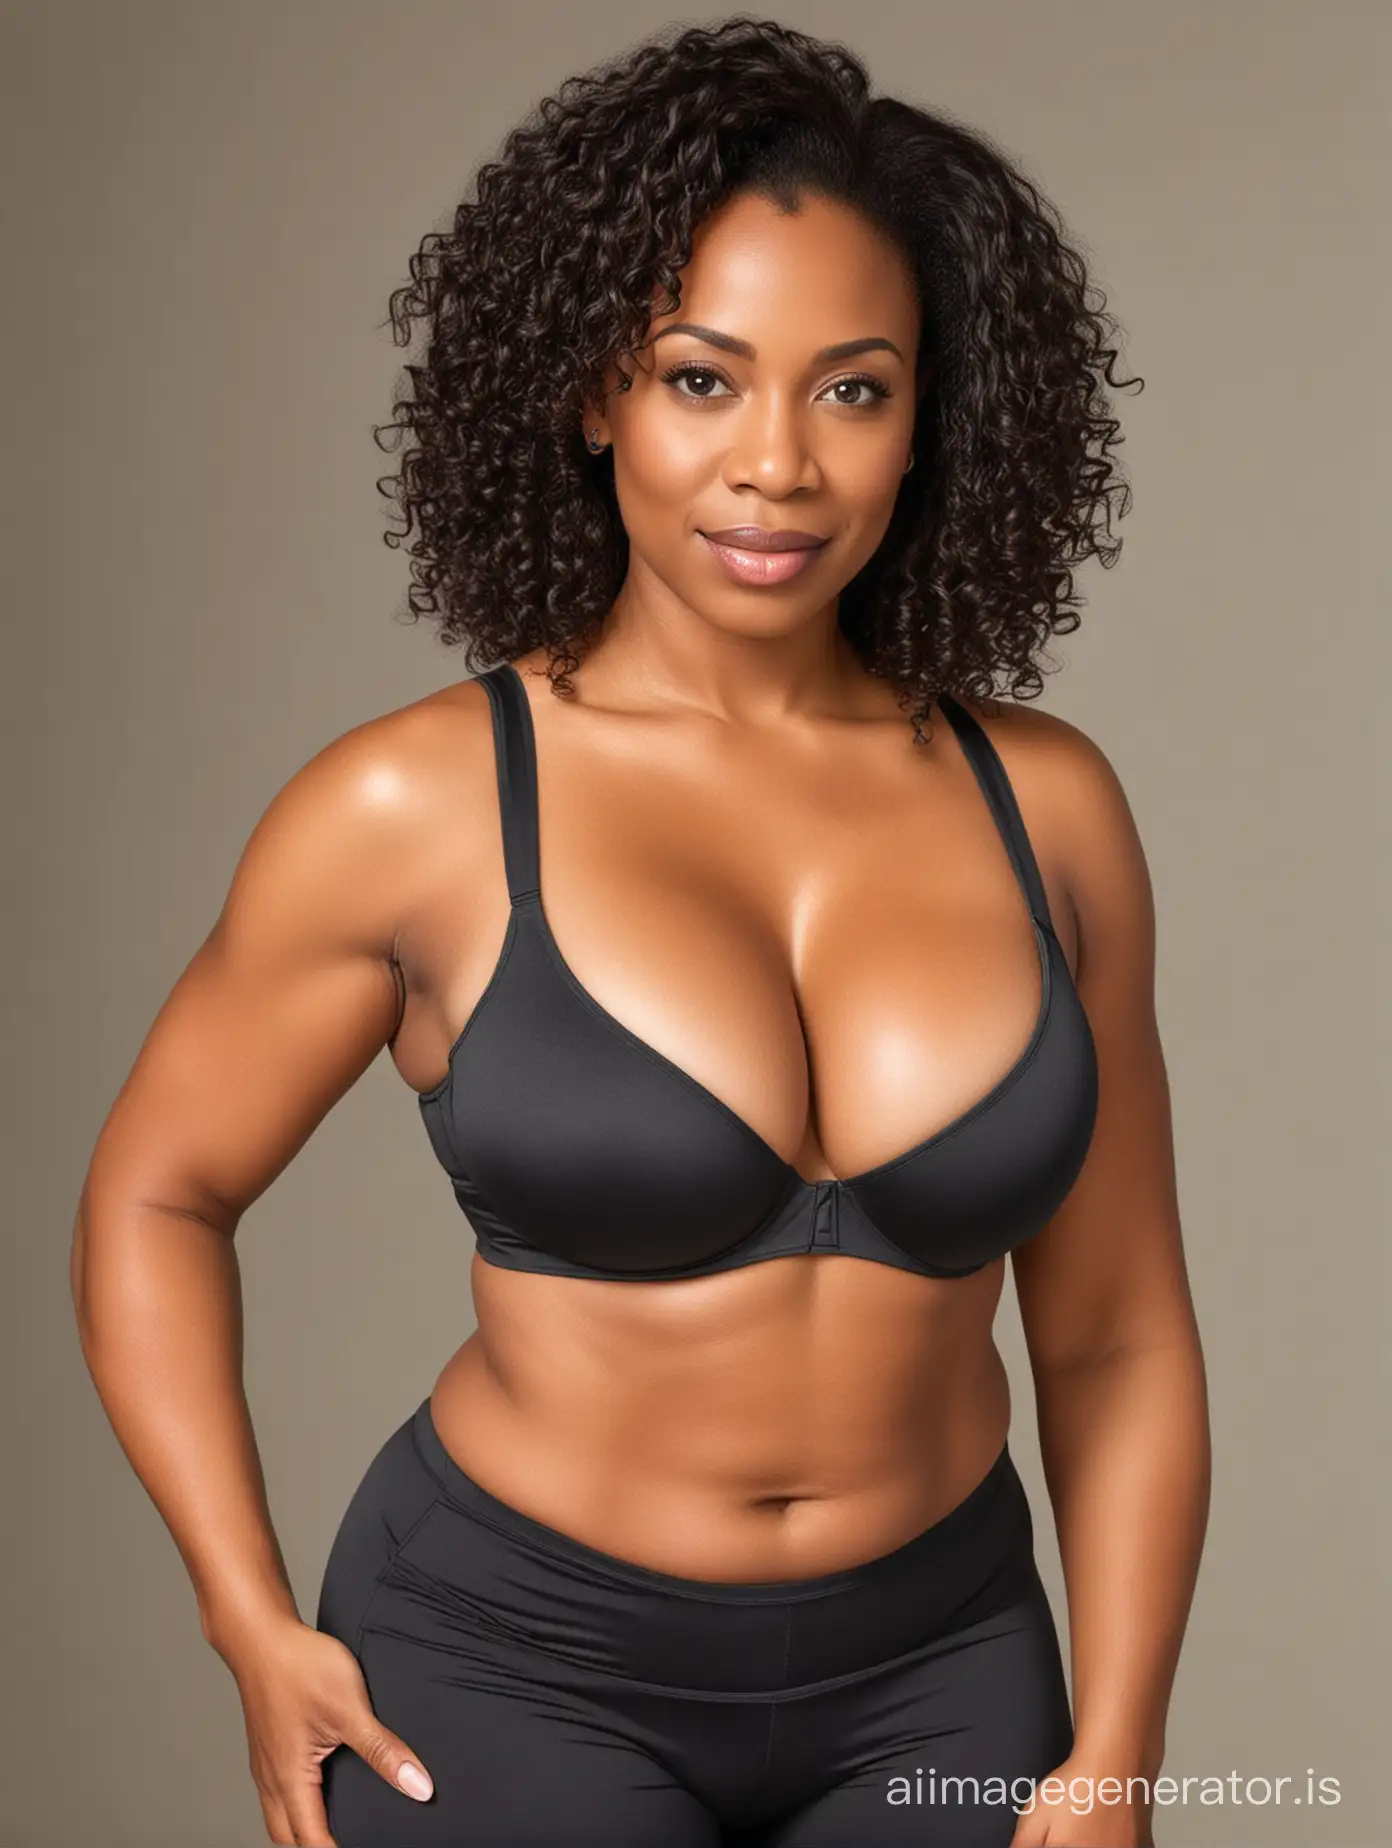 Confident-Black-Woman-with-Curvaceous-Figure-in-Stylish-Lingerie